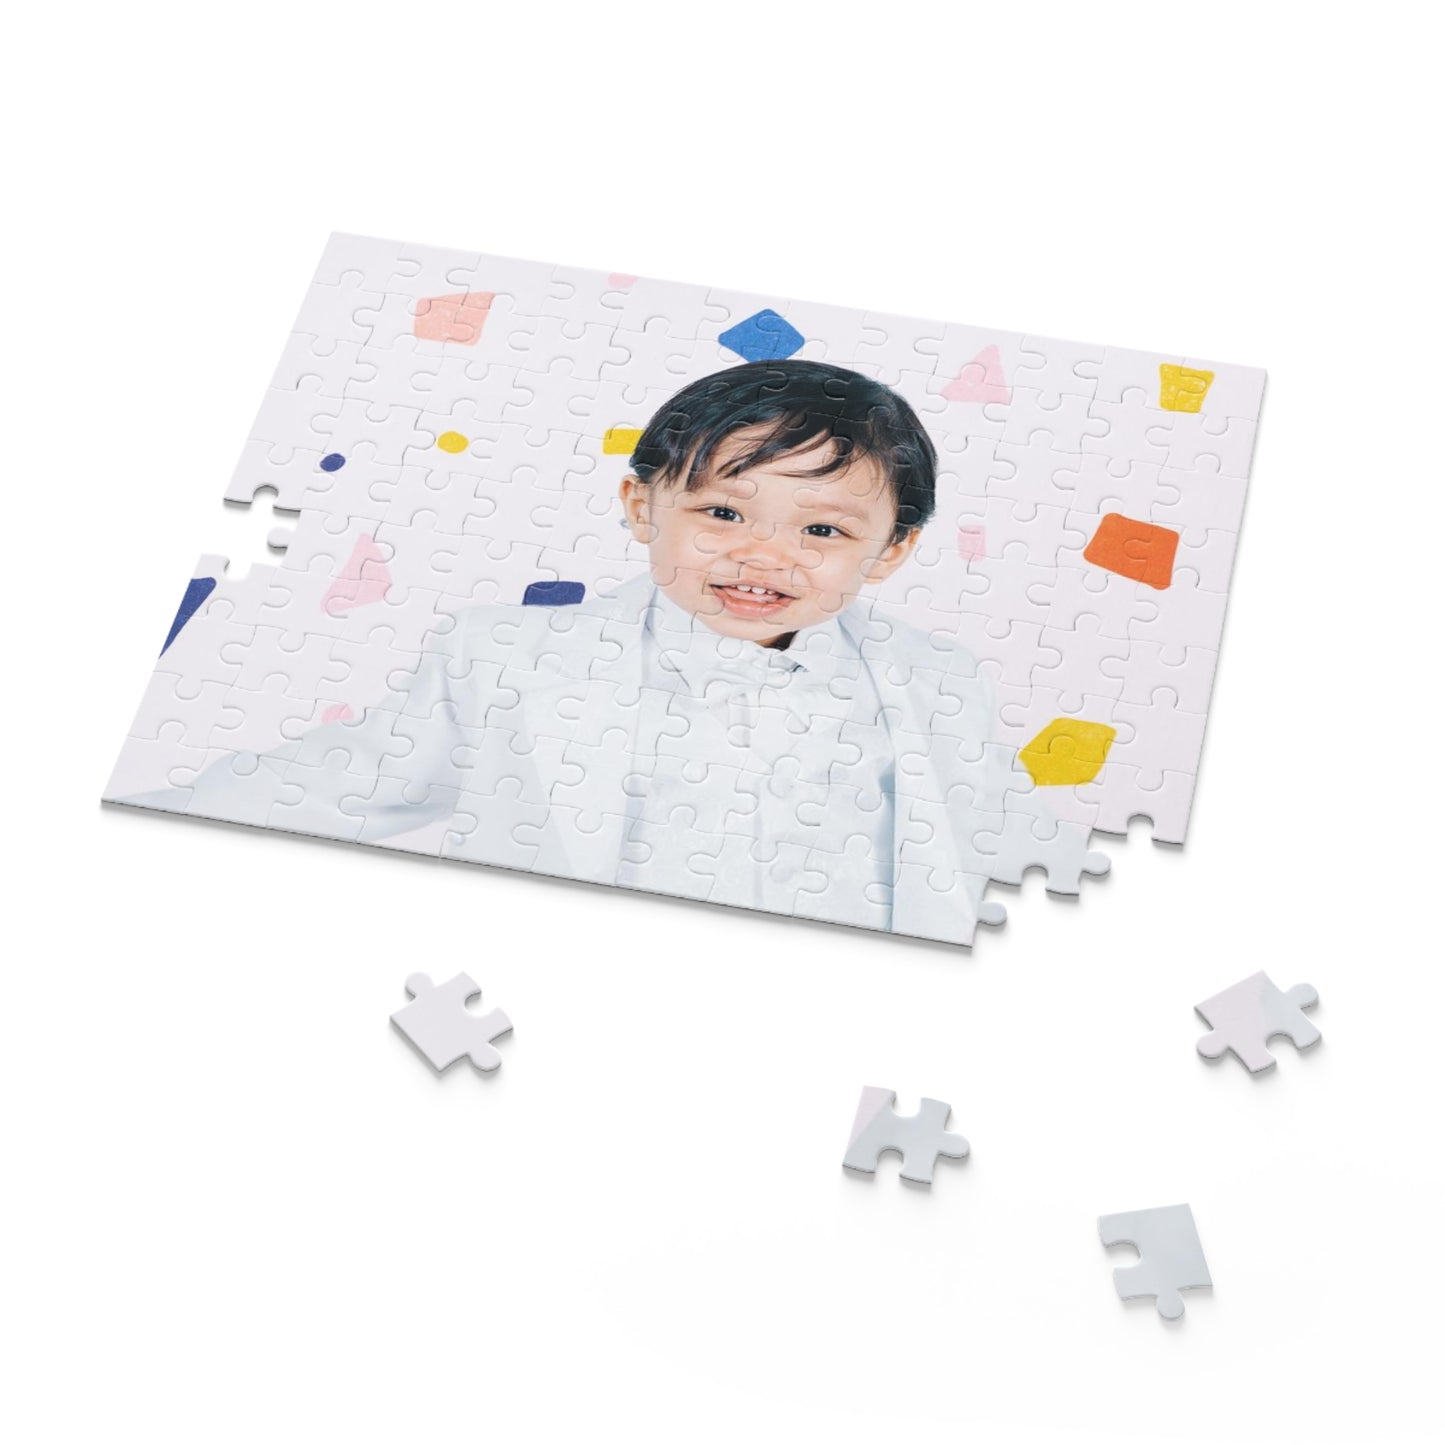 Customize Your Own Puzzle Board (120 pieces)